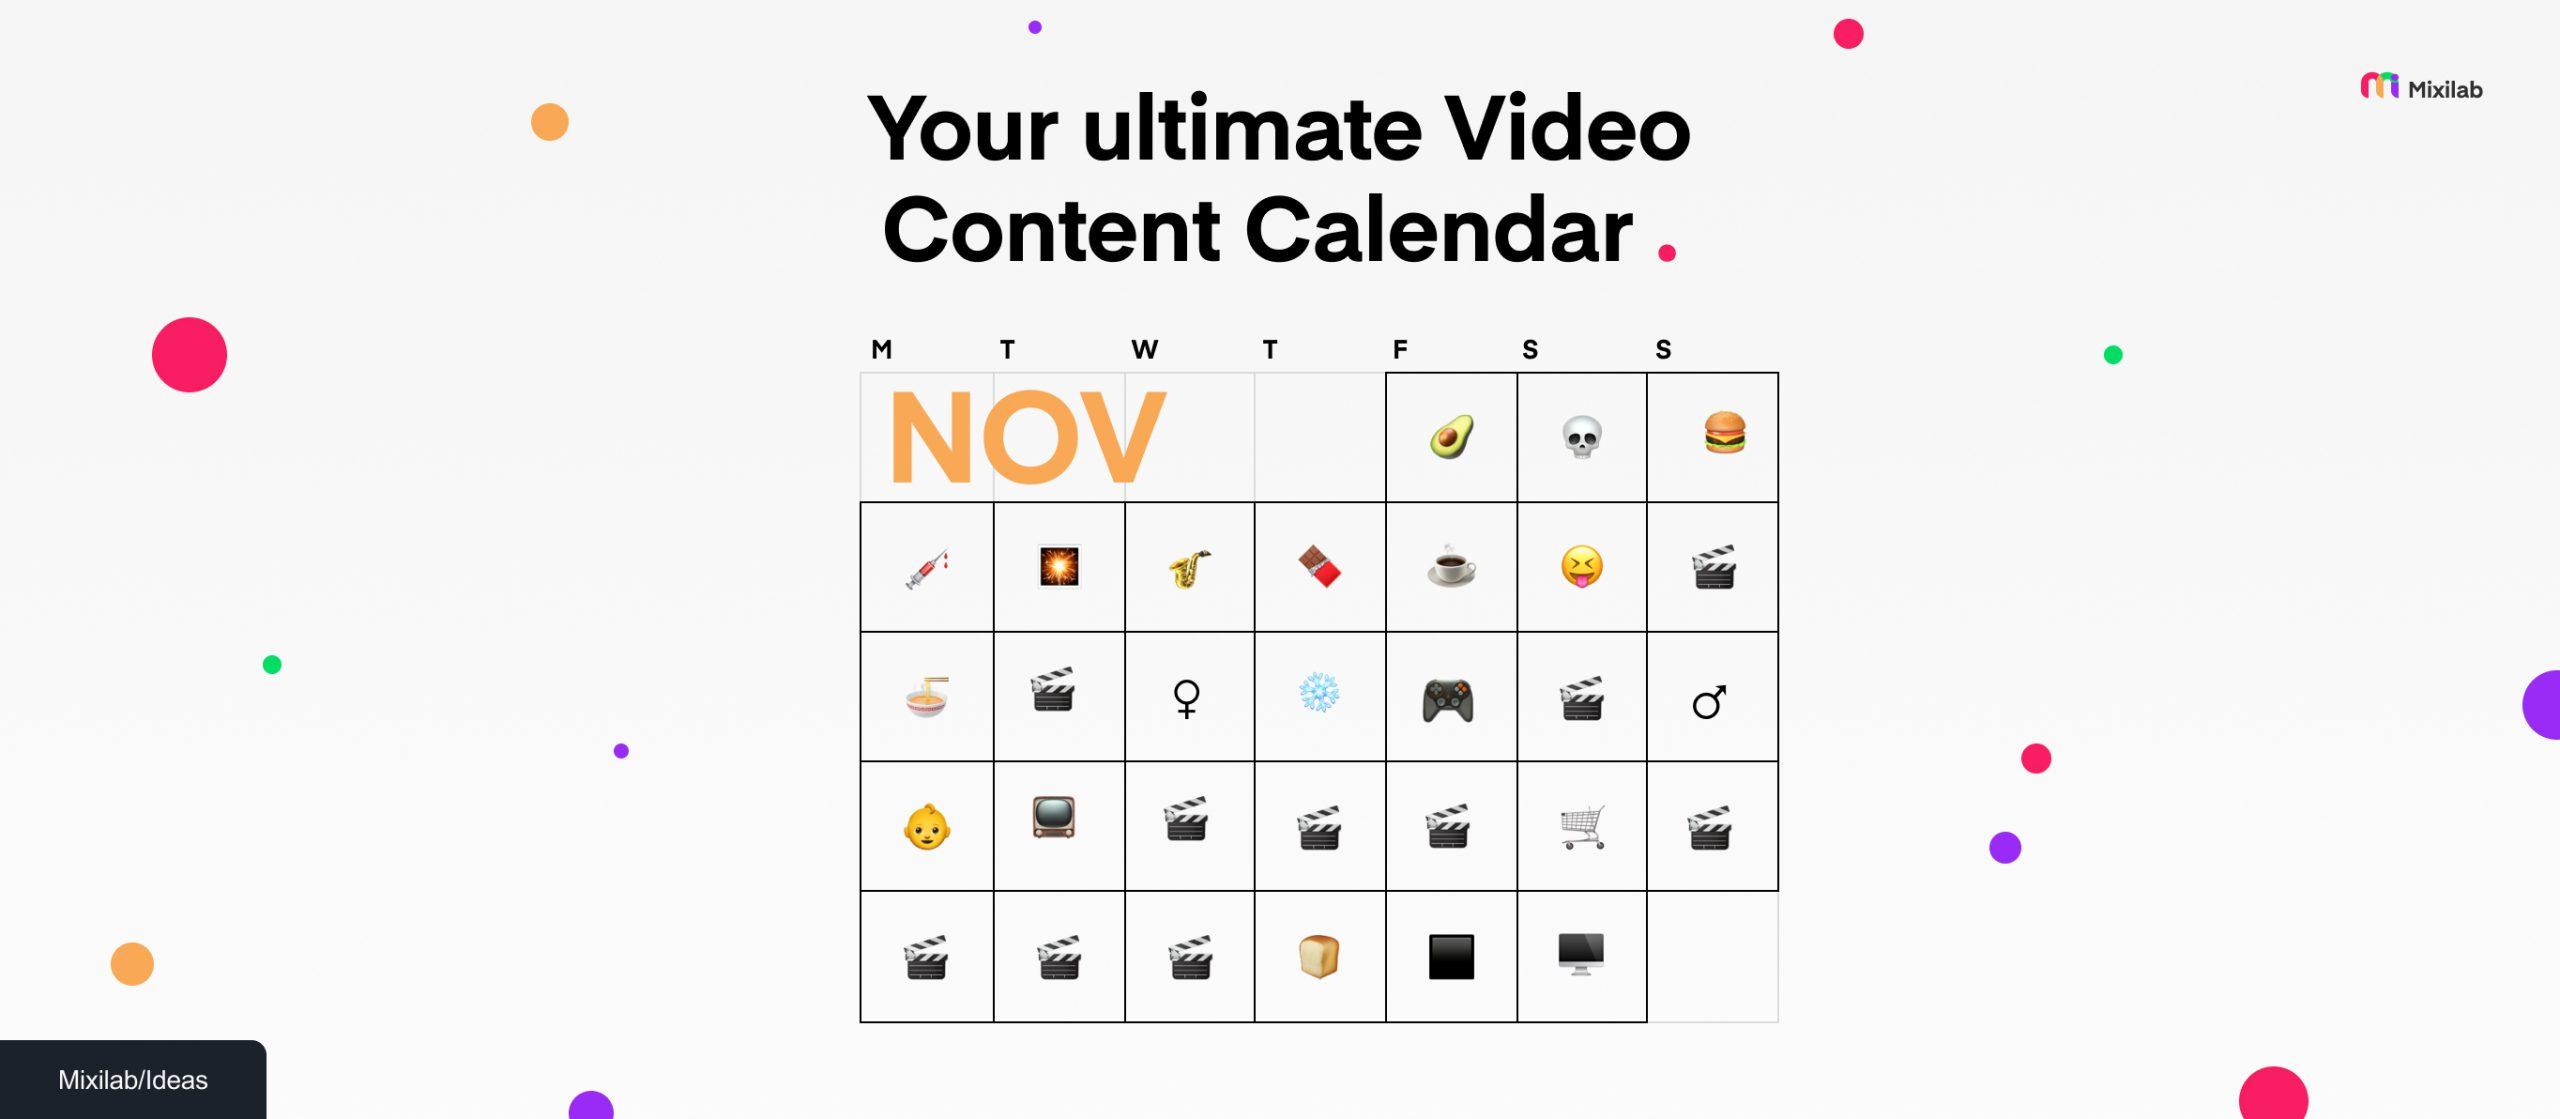 One Video Idea for each Day of November – Your ultimate Video Content Calendar